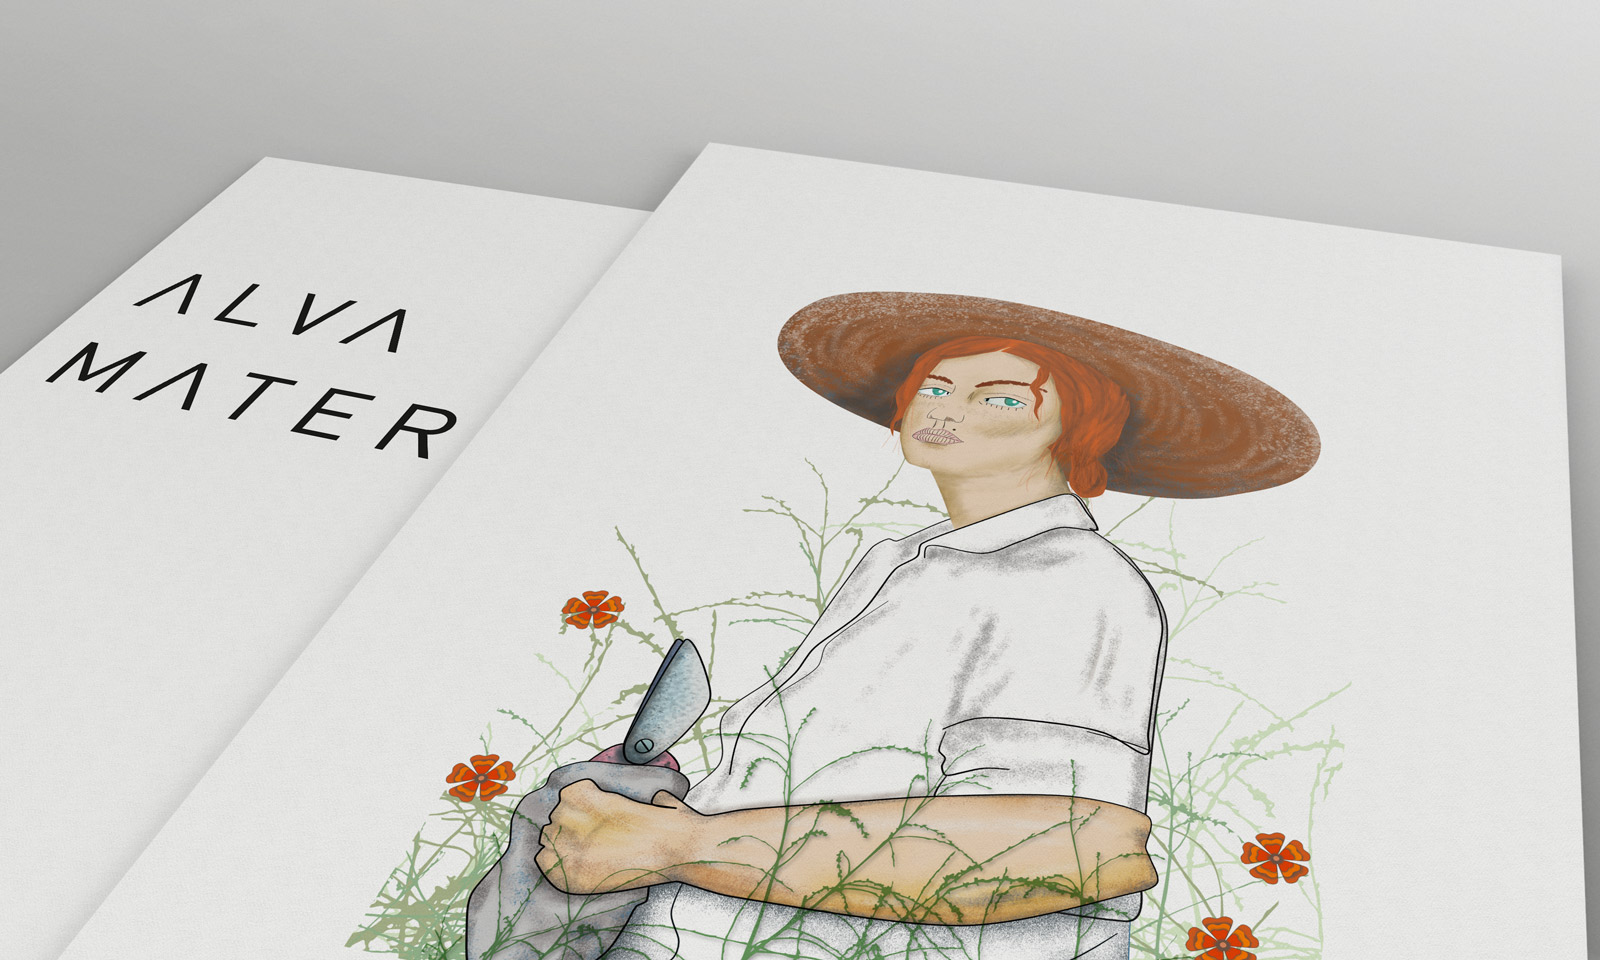 Graphic and creative design of wine labels and packaging for ALVA MATER